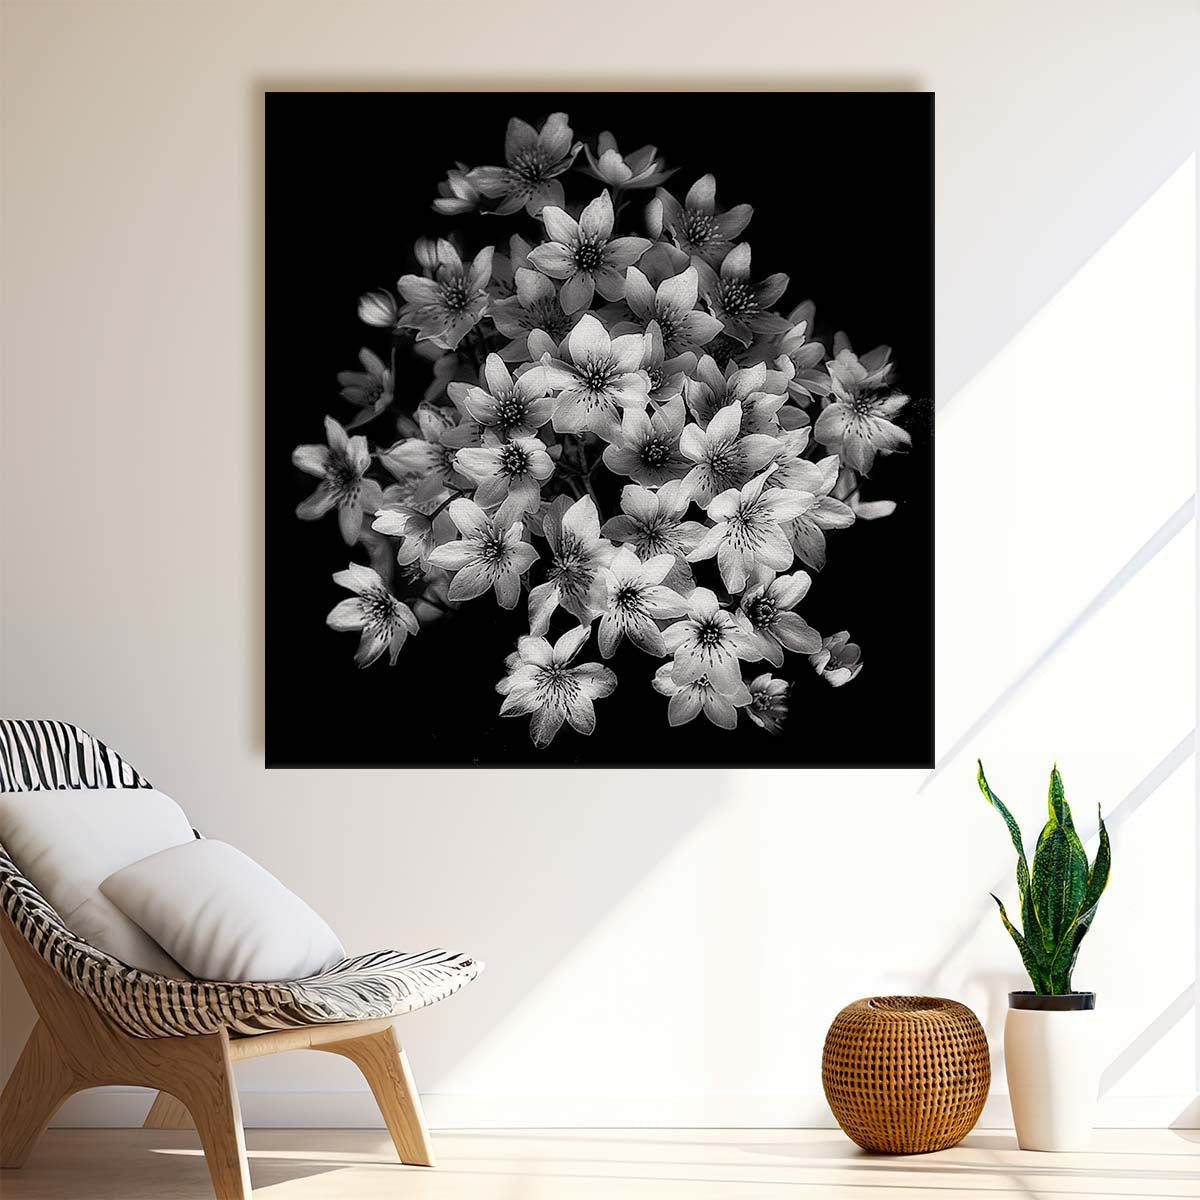 Spring in Bruges Monochrome Clematis Blossoms Still Life Wall Art by Luxuriance Designs. Made in USA.